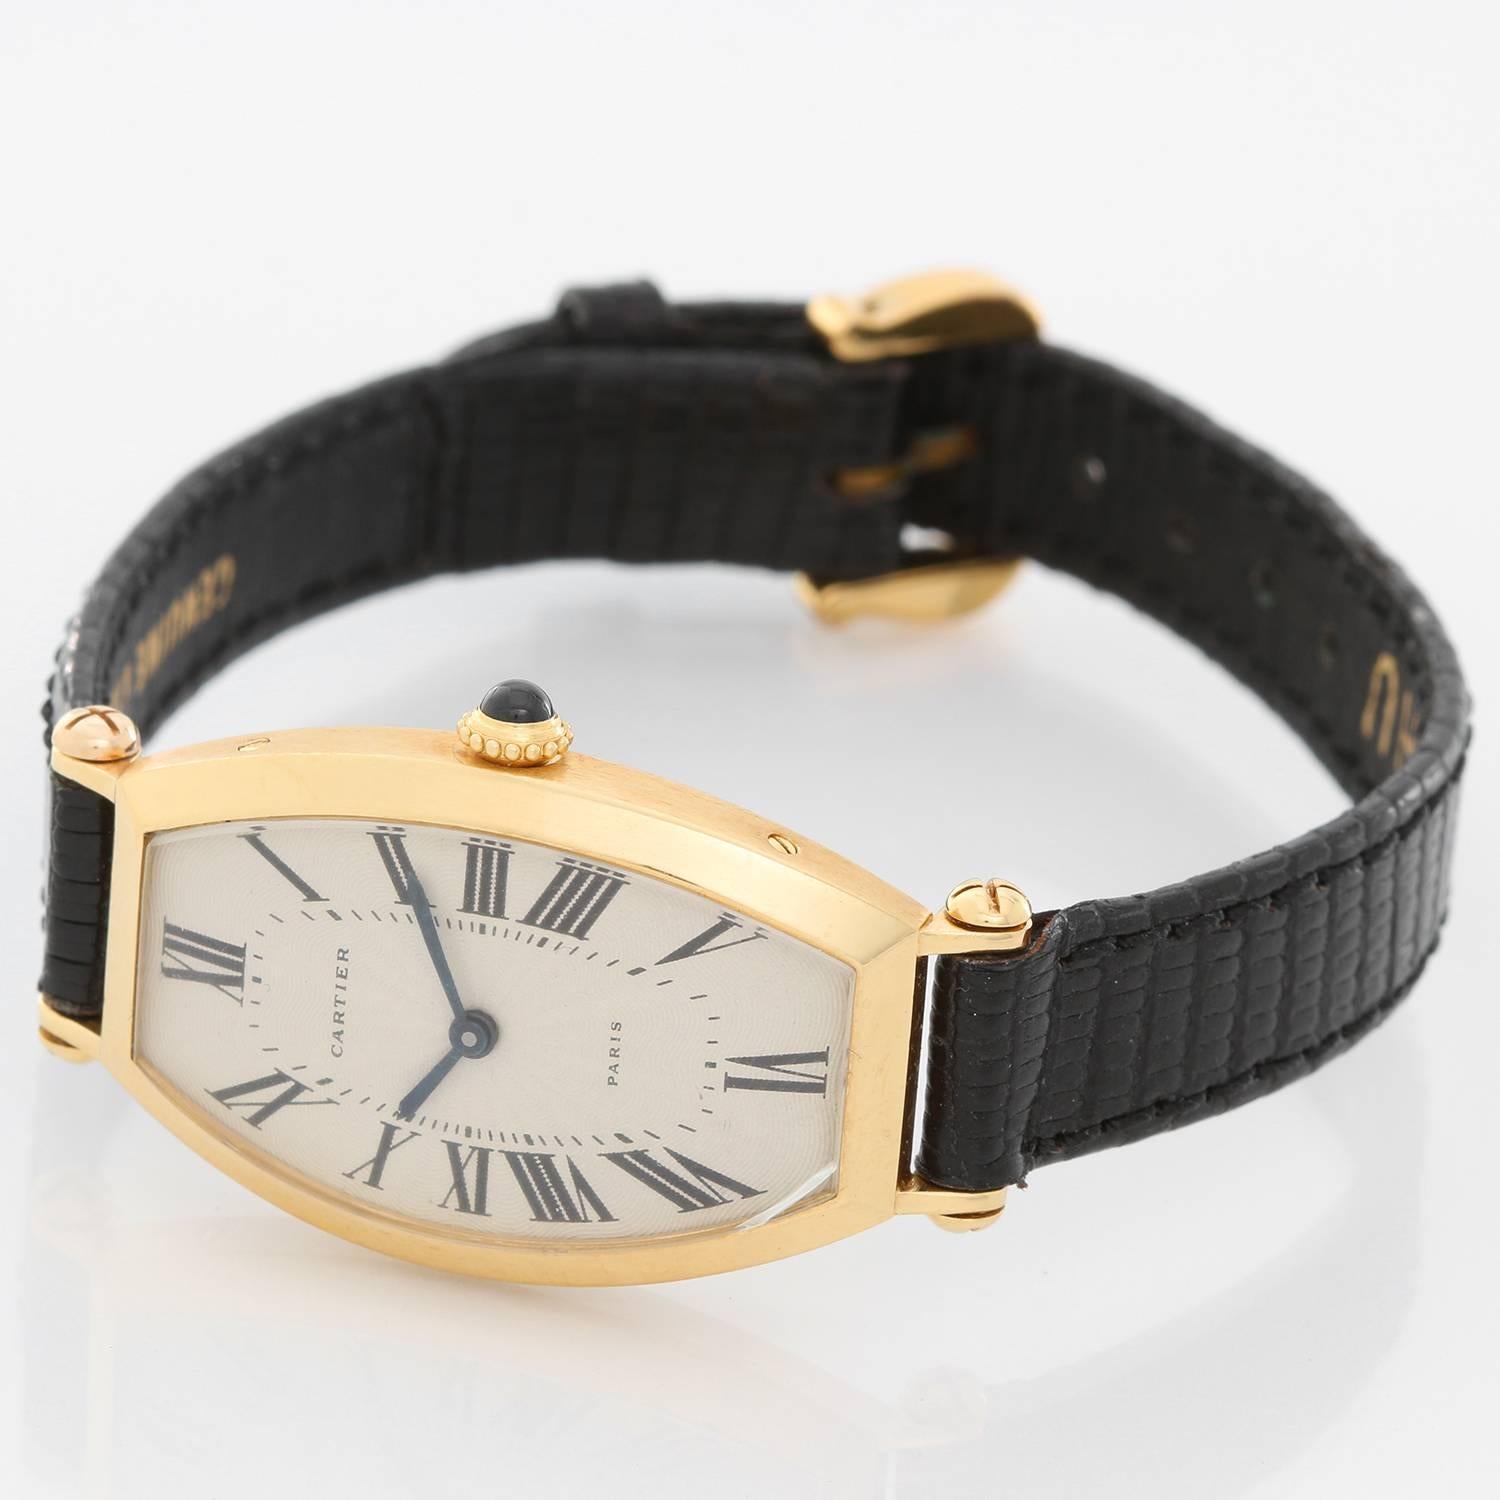 Cartier Tonneau Ladies Yellow Gold Watch - Manual winding. 18K Yellow gold ( 21 x 32 mm ). Silvered Guilloche dial with blue hands. black lizard strap with tang buckle. Pre-owned with Cartier box.